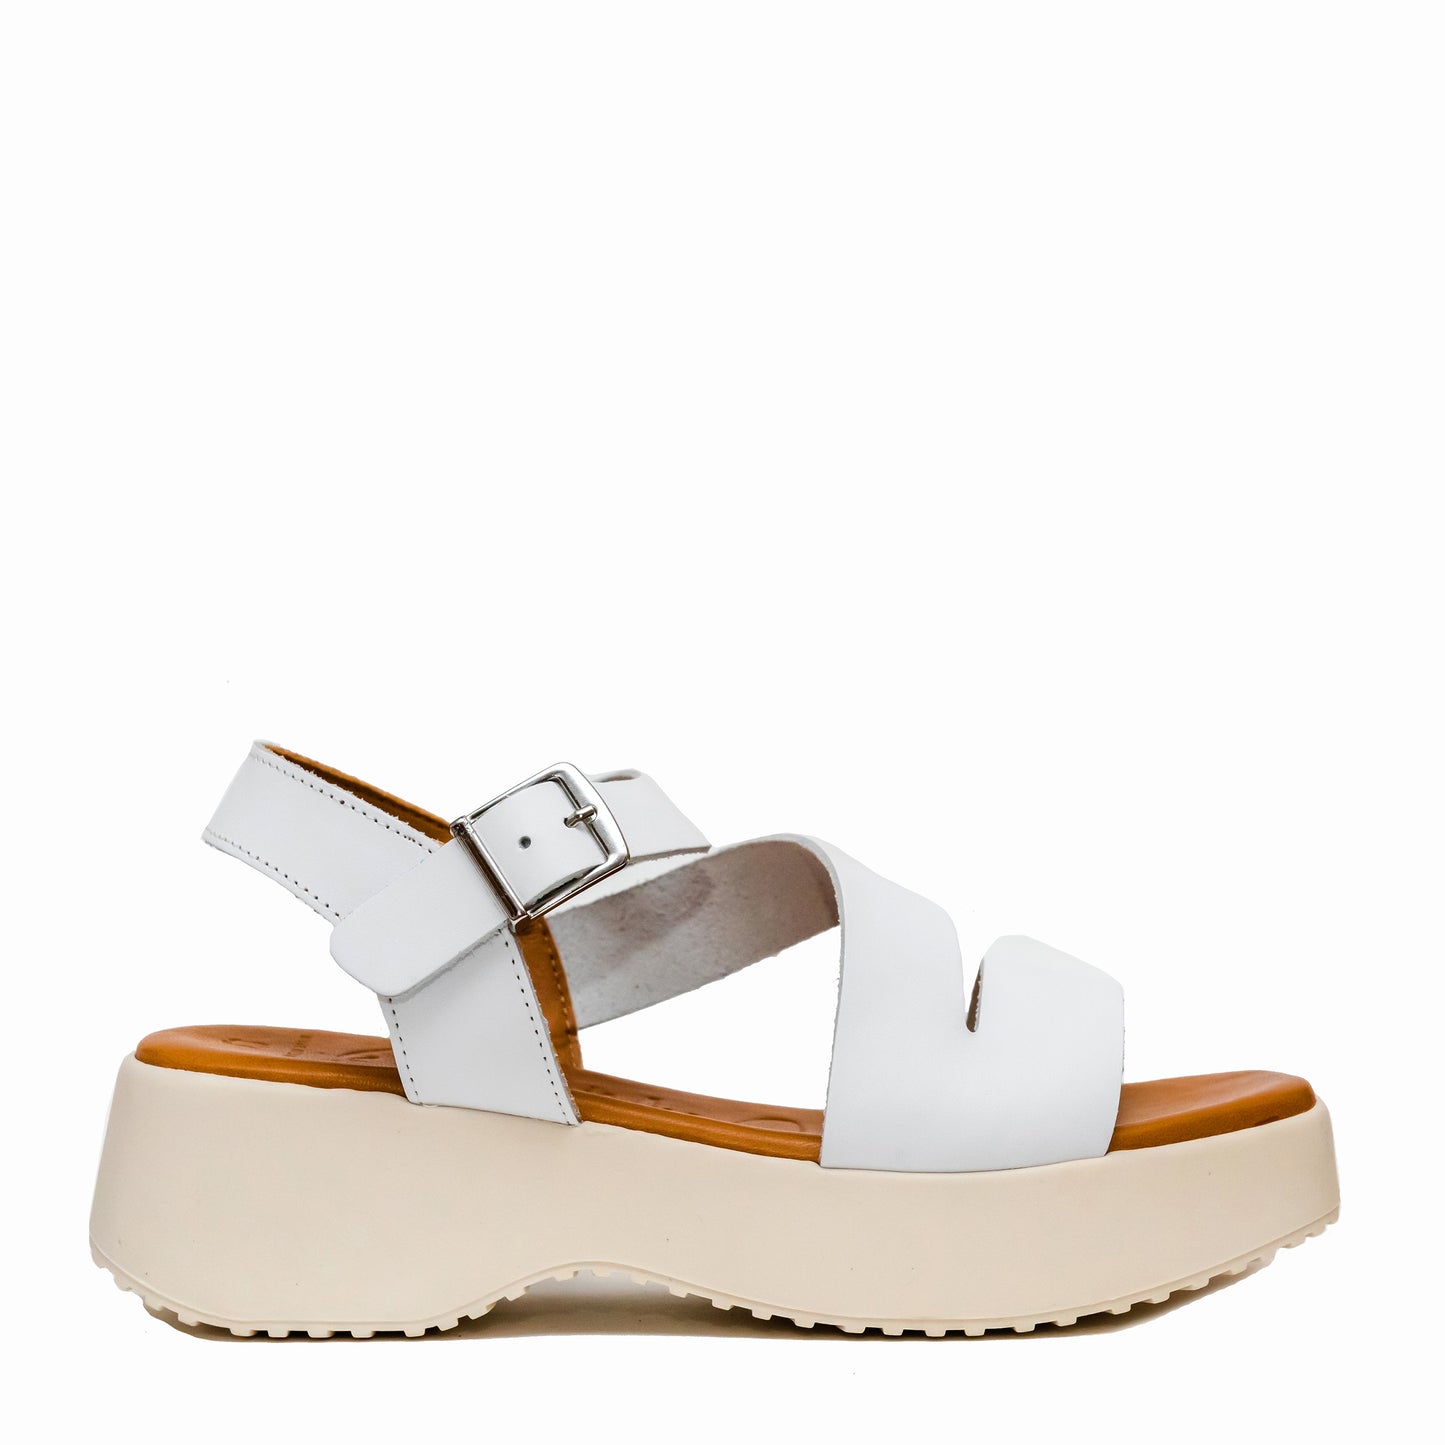 Oh My Sandals 5196 White Cross Strap Sandals